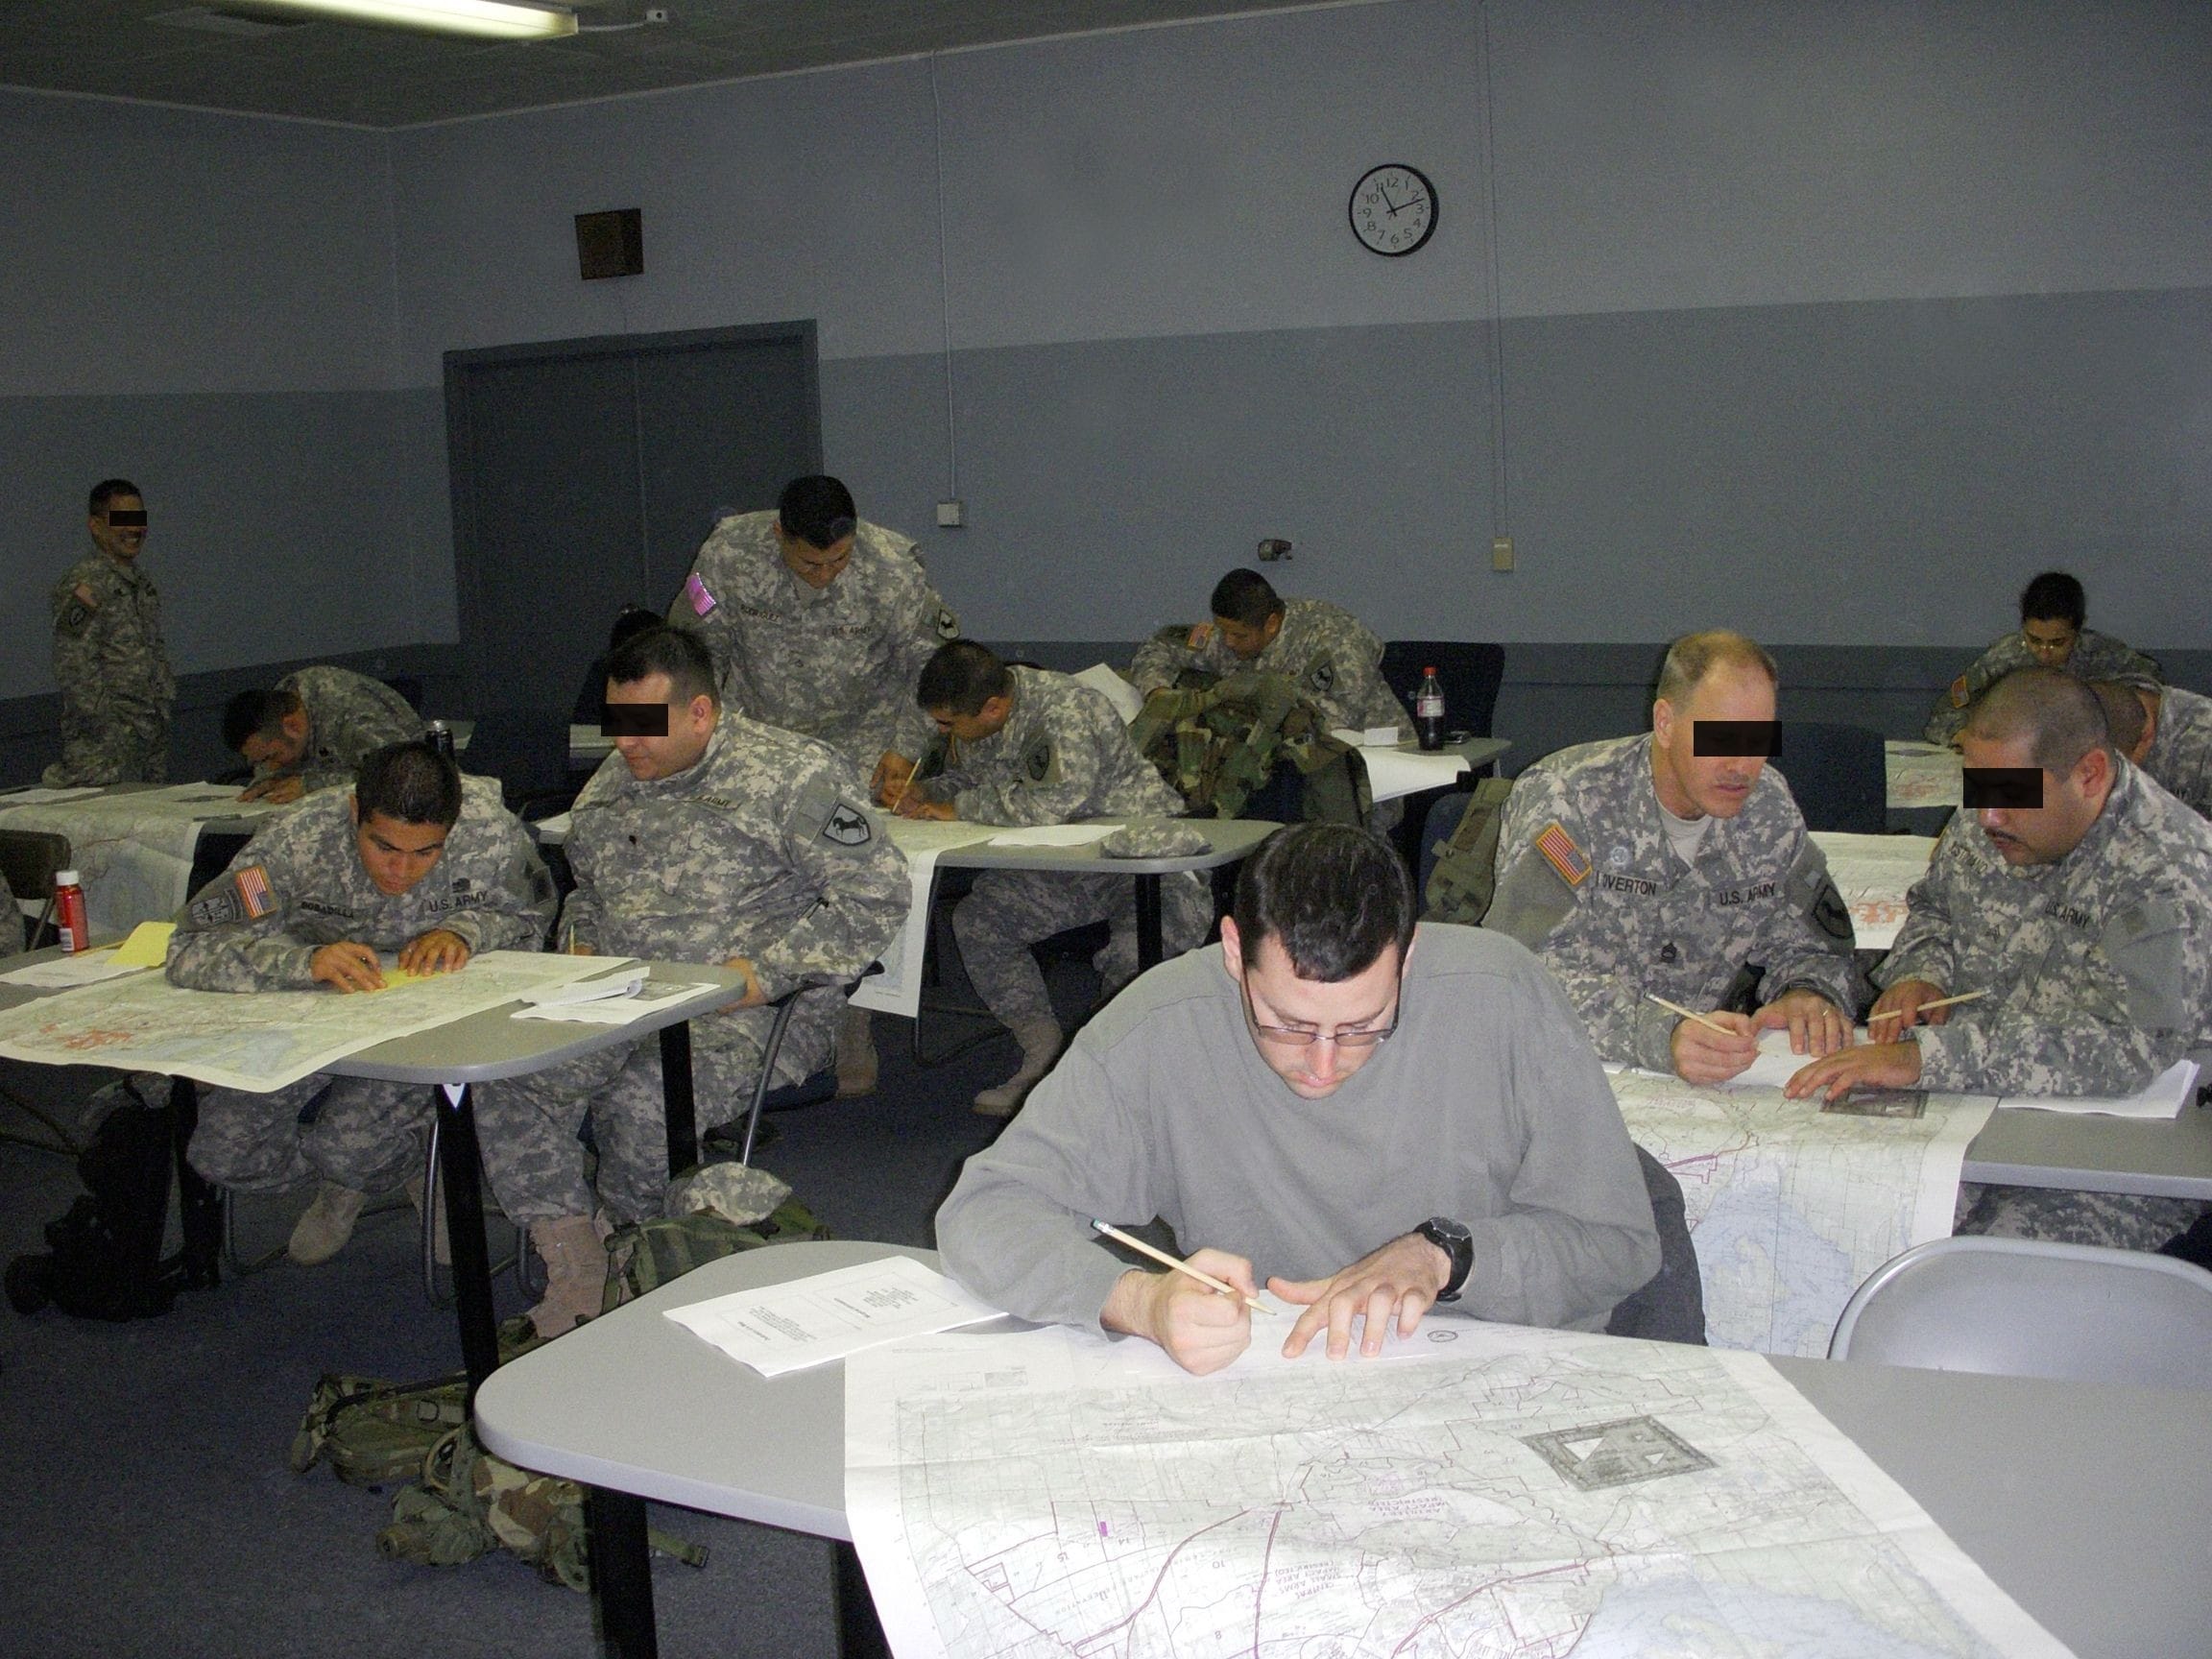 In the military Staff Sergeant was ordered from time to time to teach U.S. Army soldiers military map reading and land navigation; in case GPS goes down.